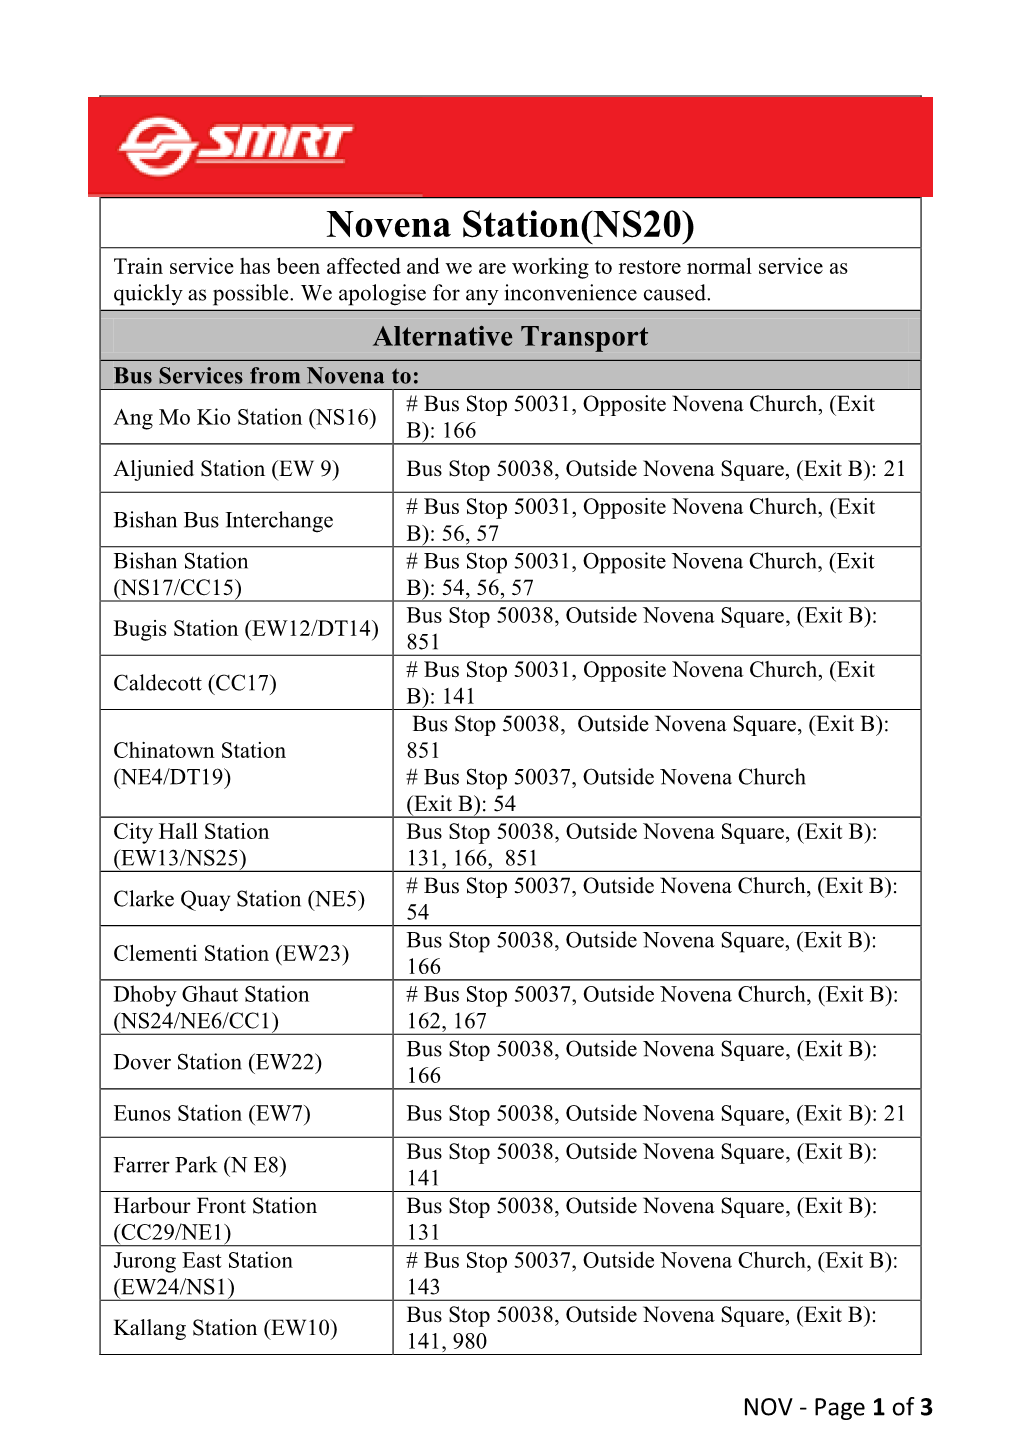 Novena Station(NS20) Train Service Has Been Affected and We Are Working to Restore Normal Service As Quickly As Possible